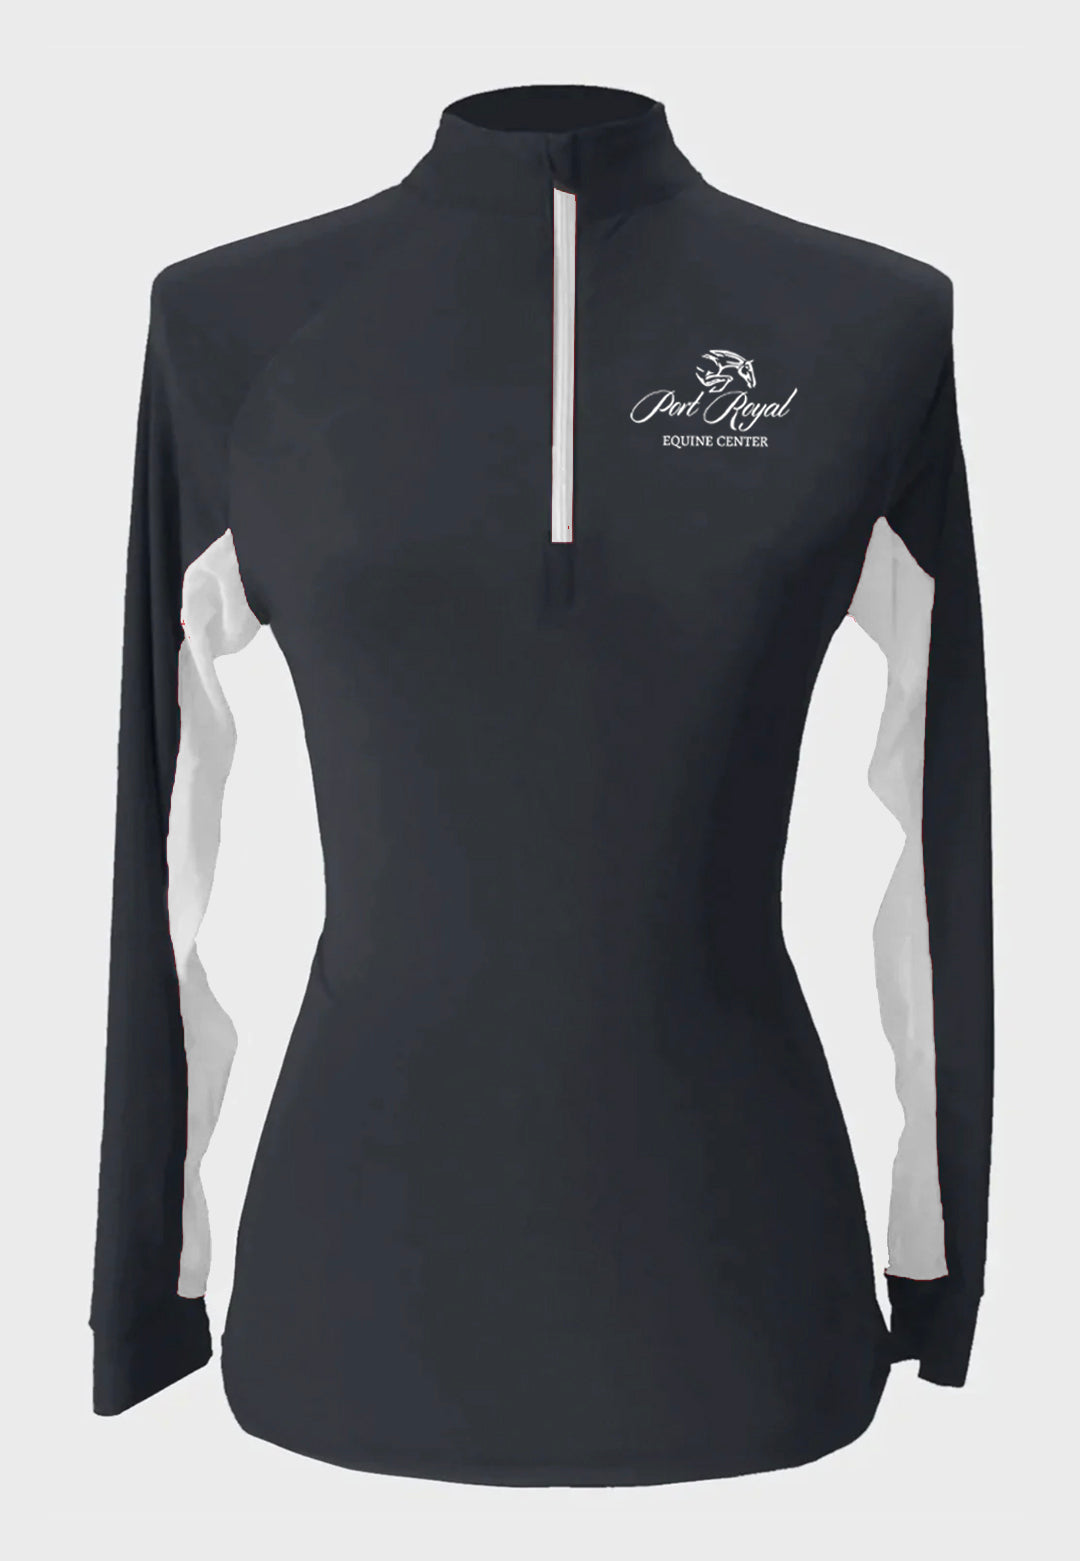 Port Royal Equine Center Black Custom Sun Shirt  - Adult and Youth Sizes